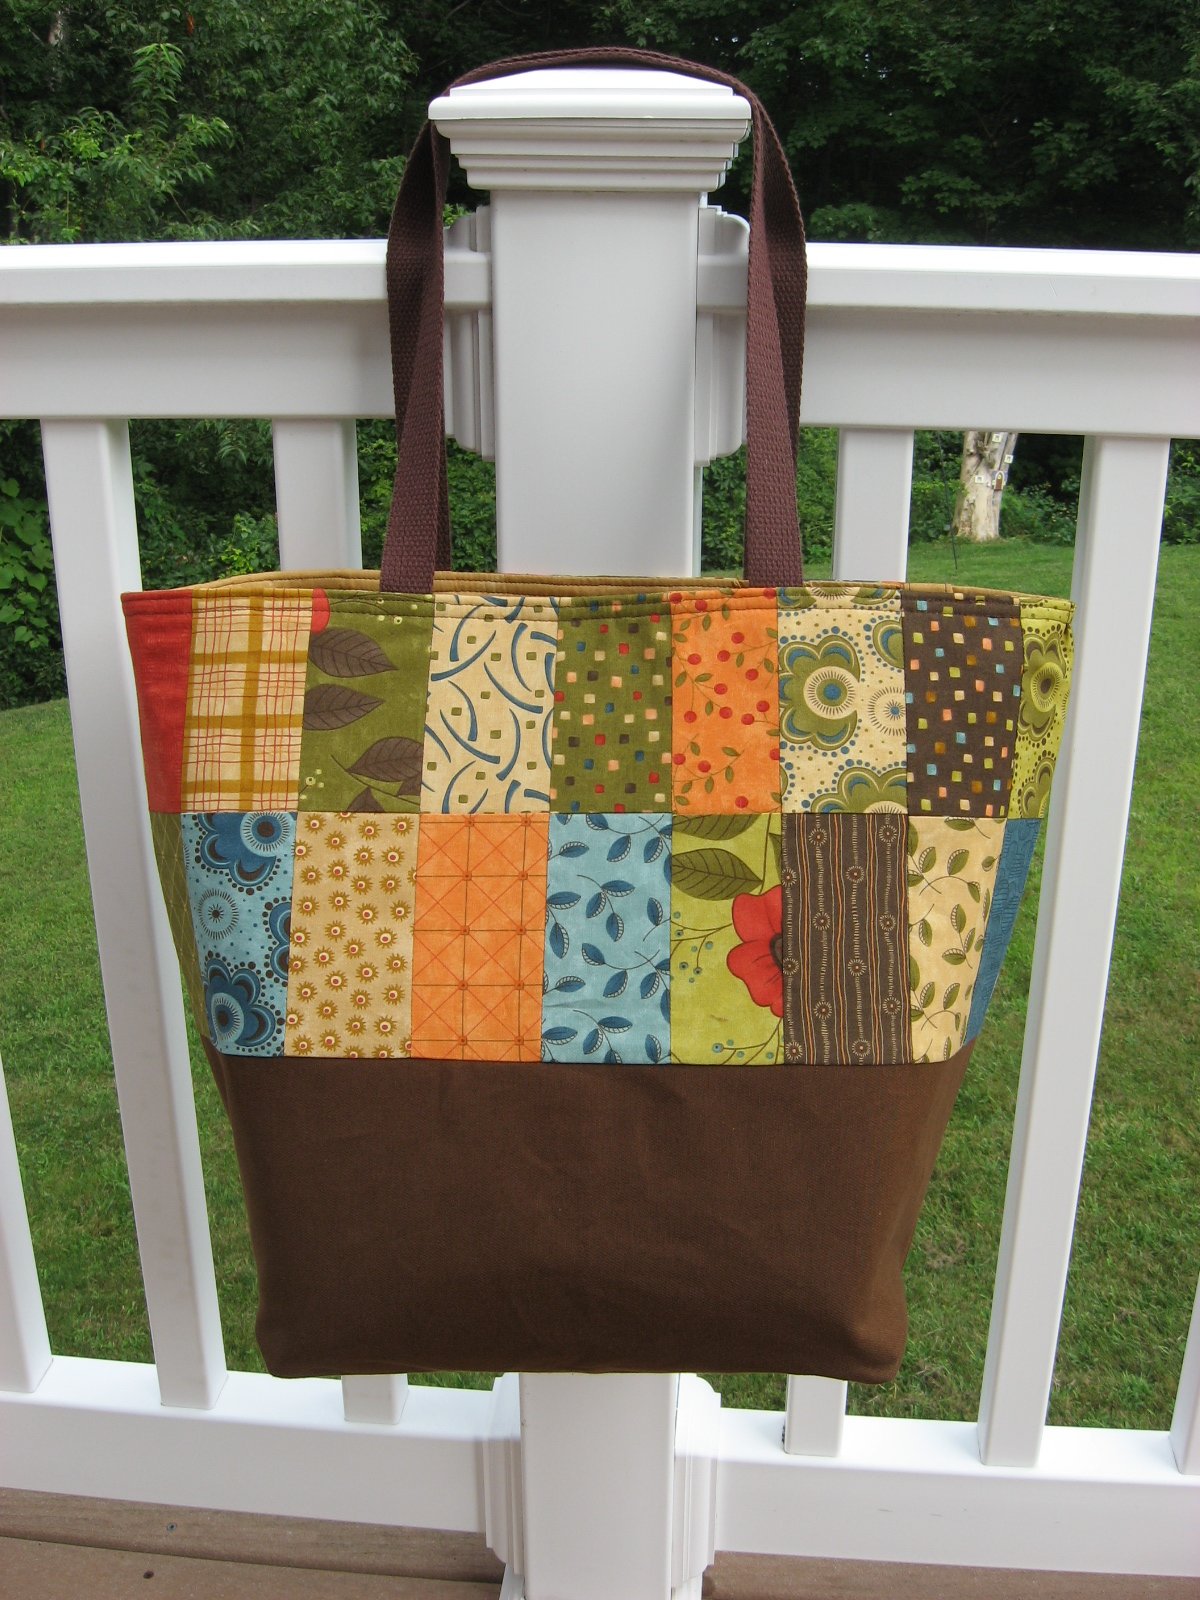 Hooked on Needles: More Summertime Sewing ~ Tote Bags!